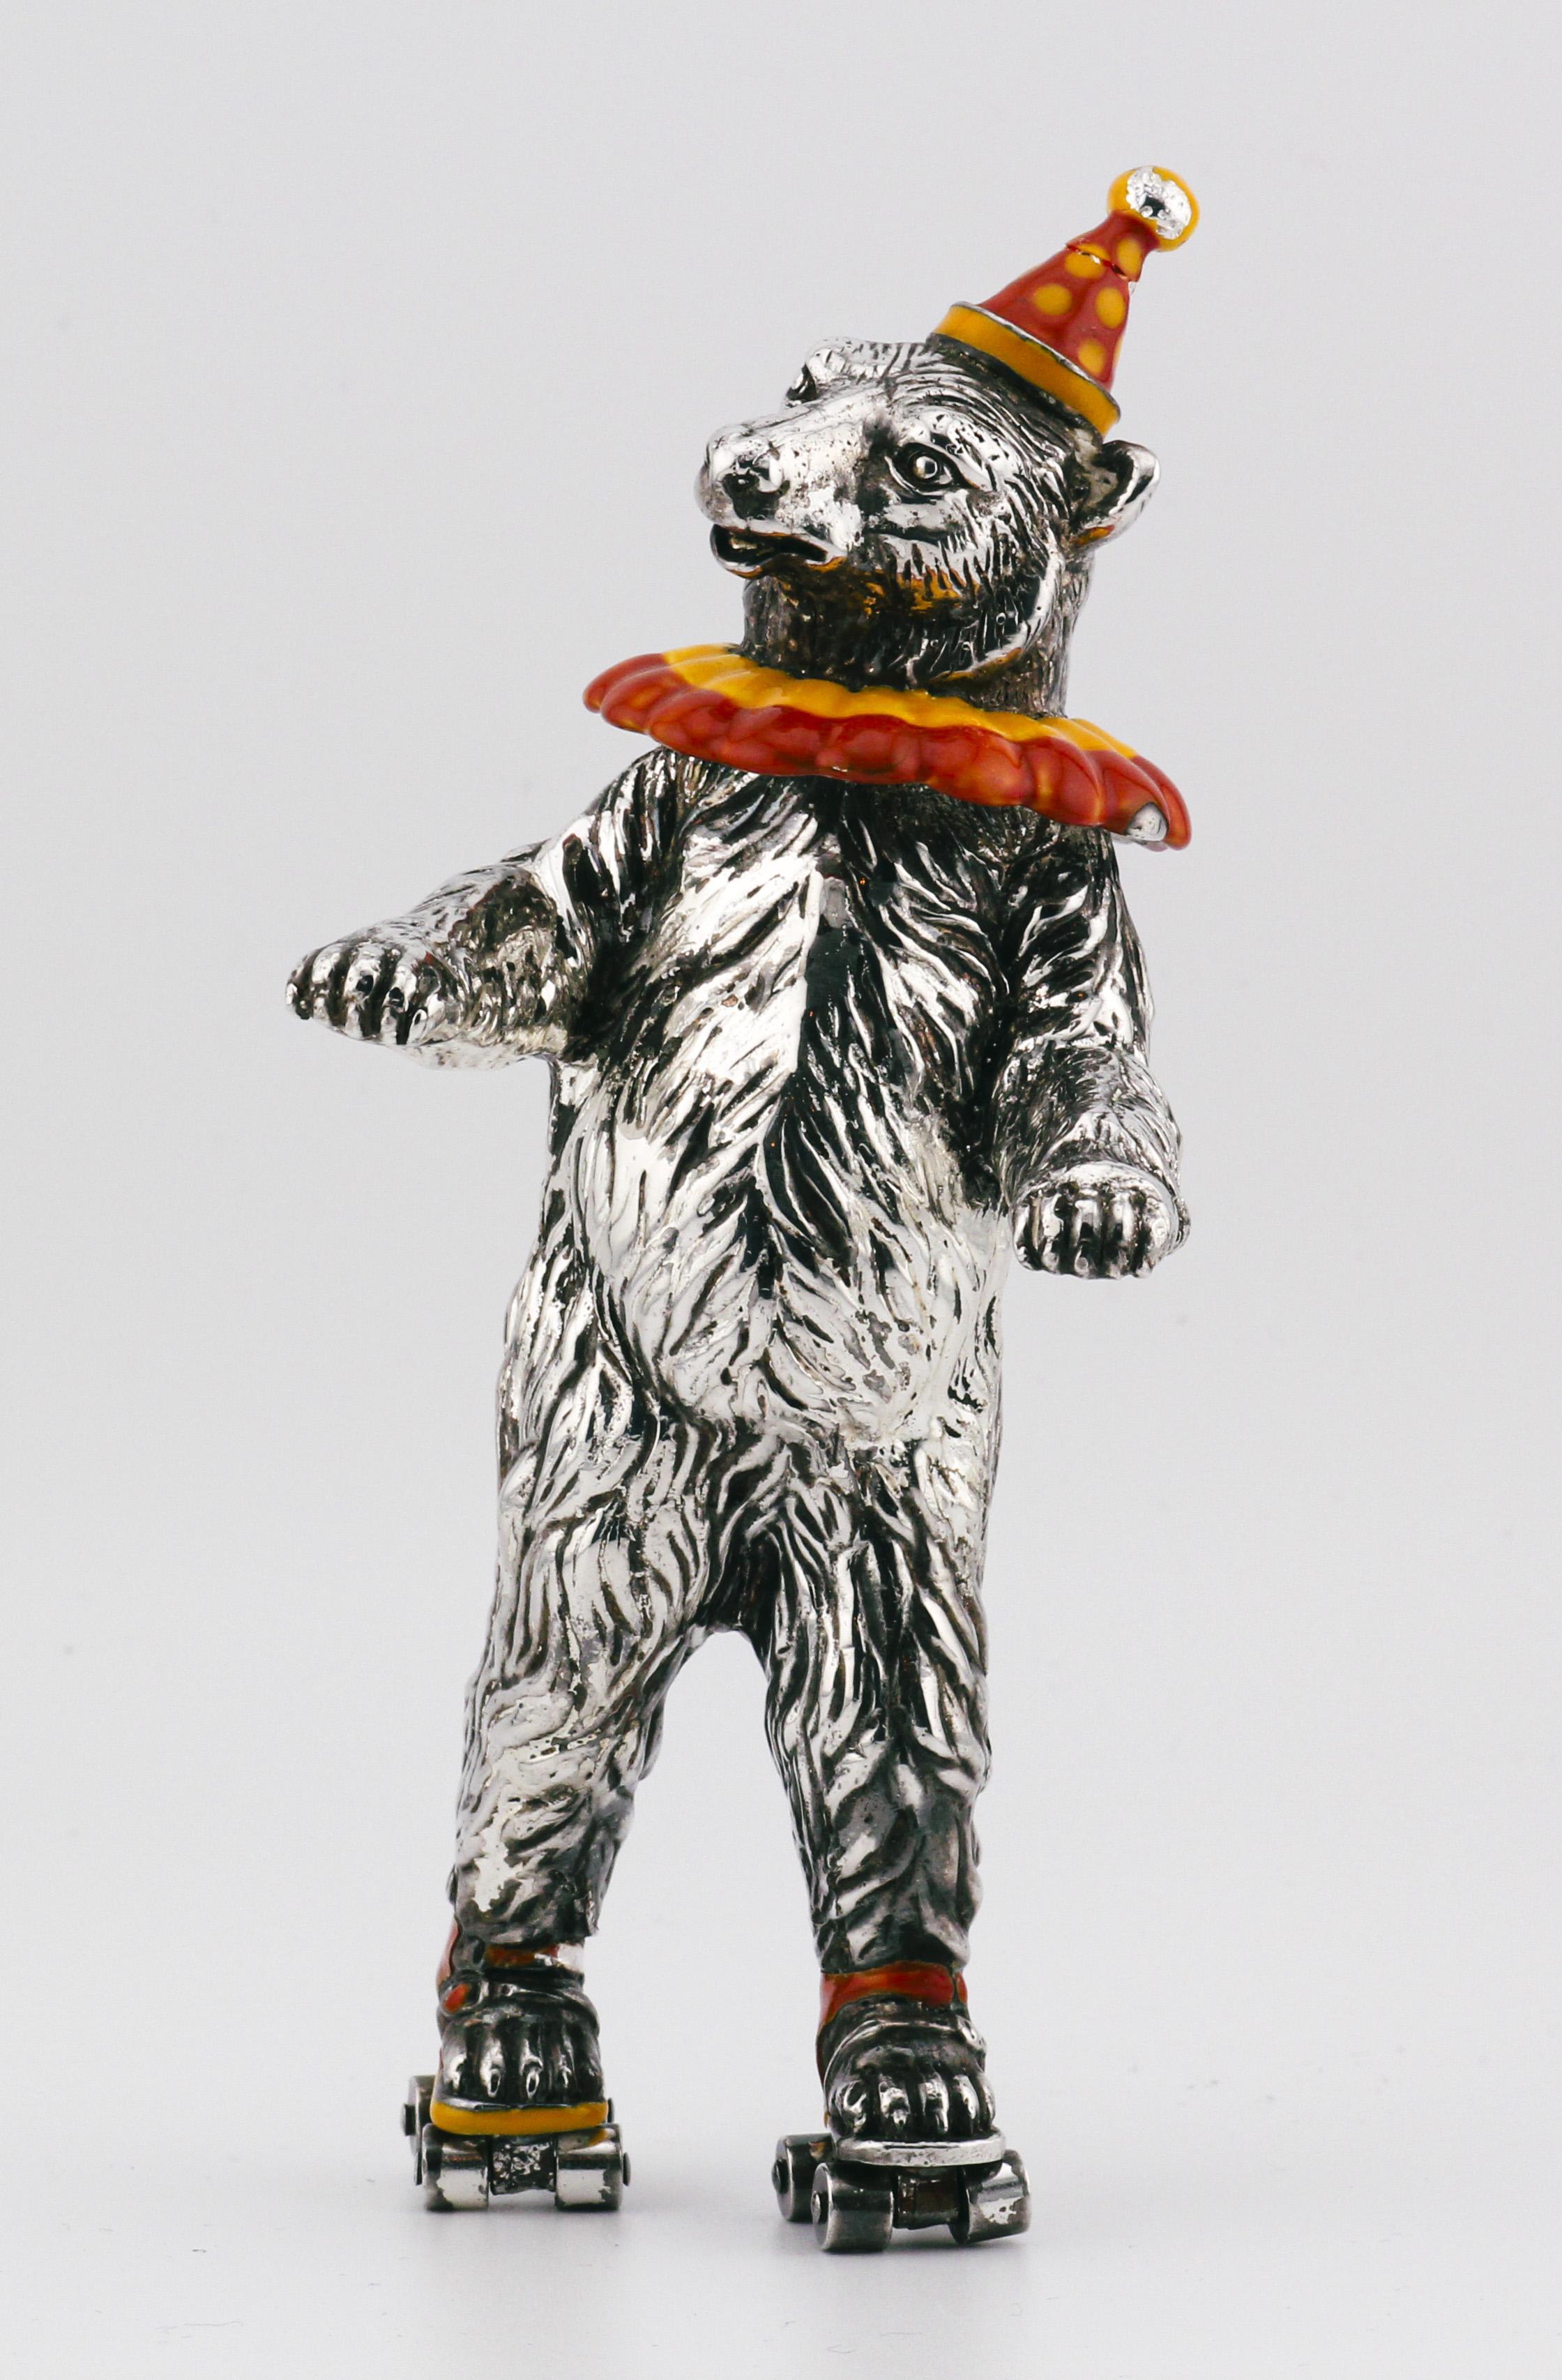 Immerse yourself in a world of enchantment with the Tiffany and Co. Sterling Silver Enamel Circus Bear on Roller Skates Figurine, a delightful embodiment of whimsy and charm. Crafted by the esteemed luxury brand Tiffany and Co., this captivating